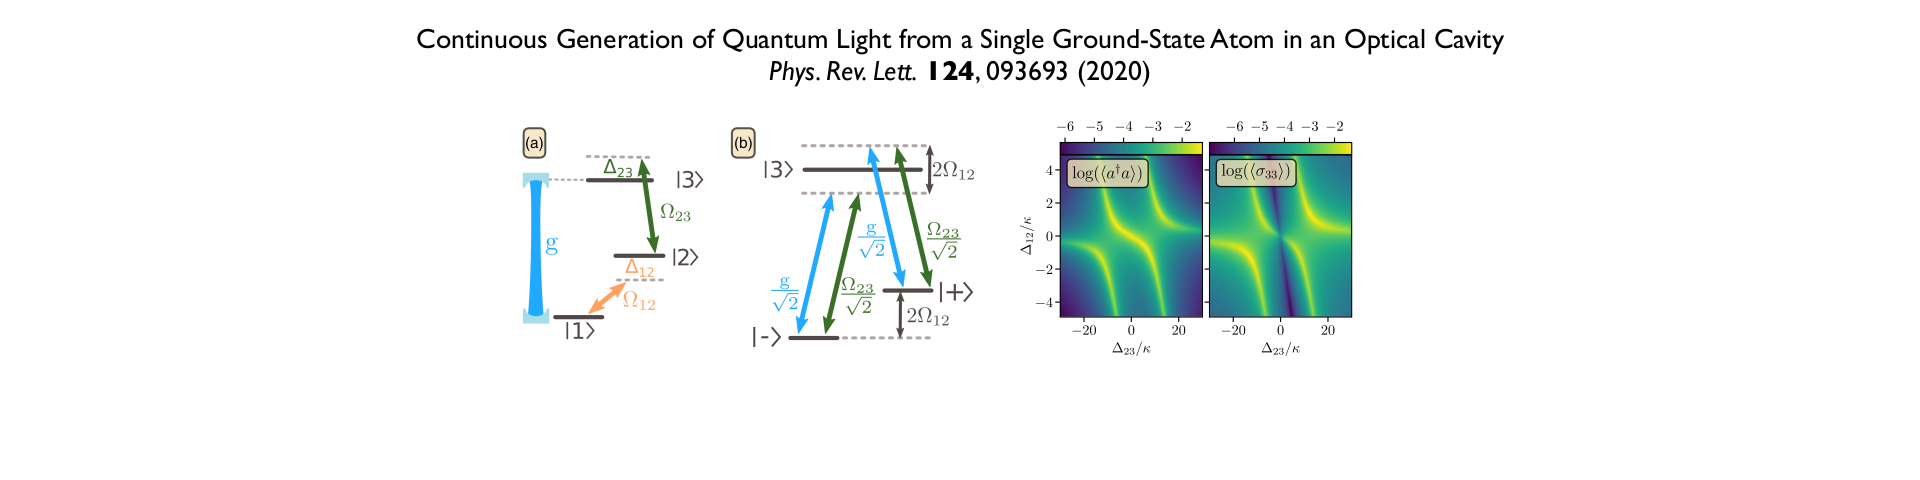 Continuous Generation of Quantum Light from a Single Ground-State Atom in an Optical Cavity